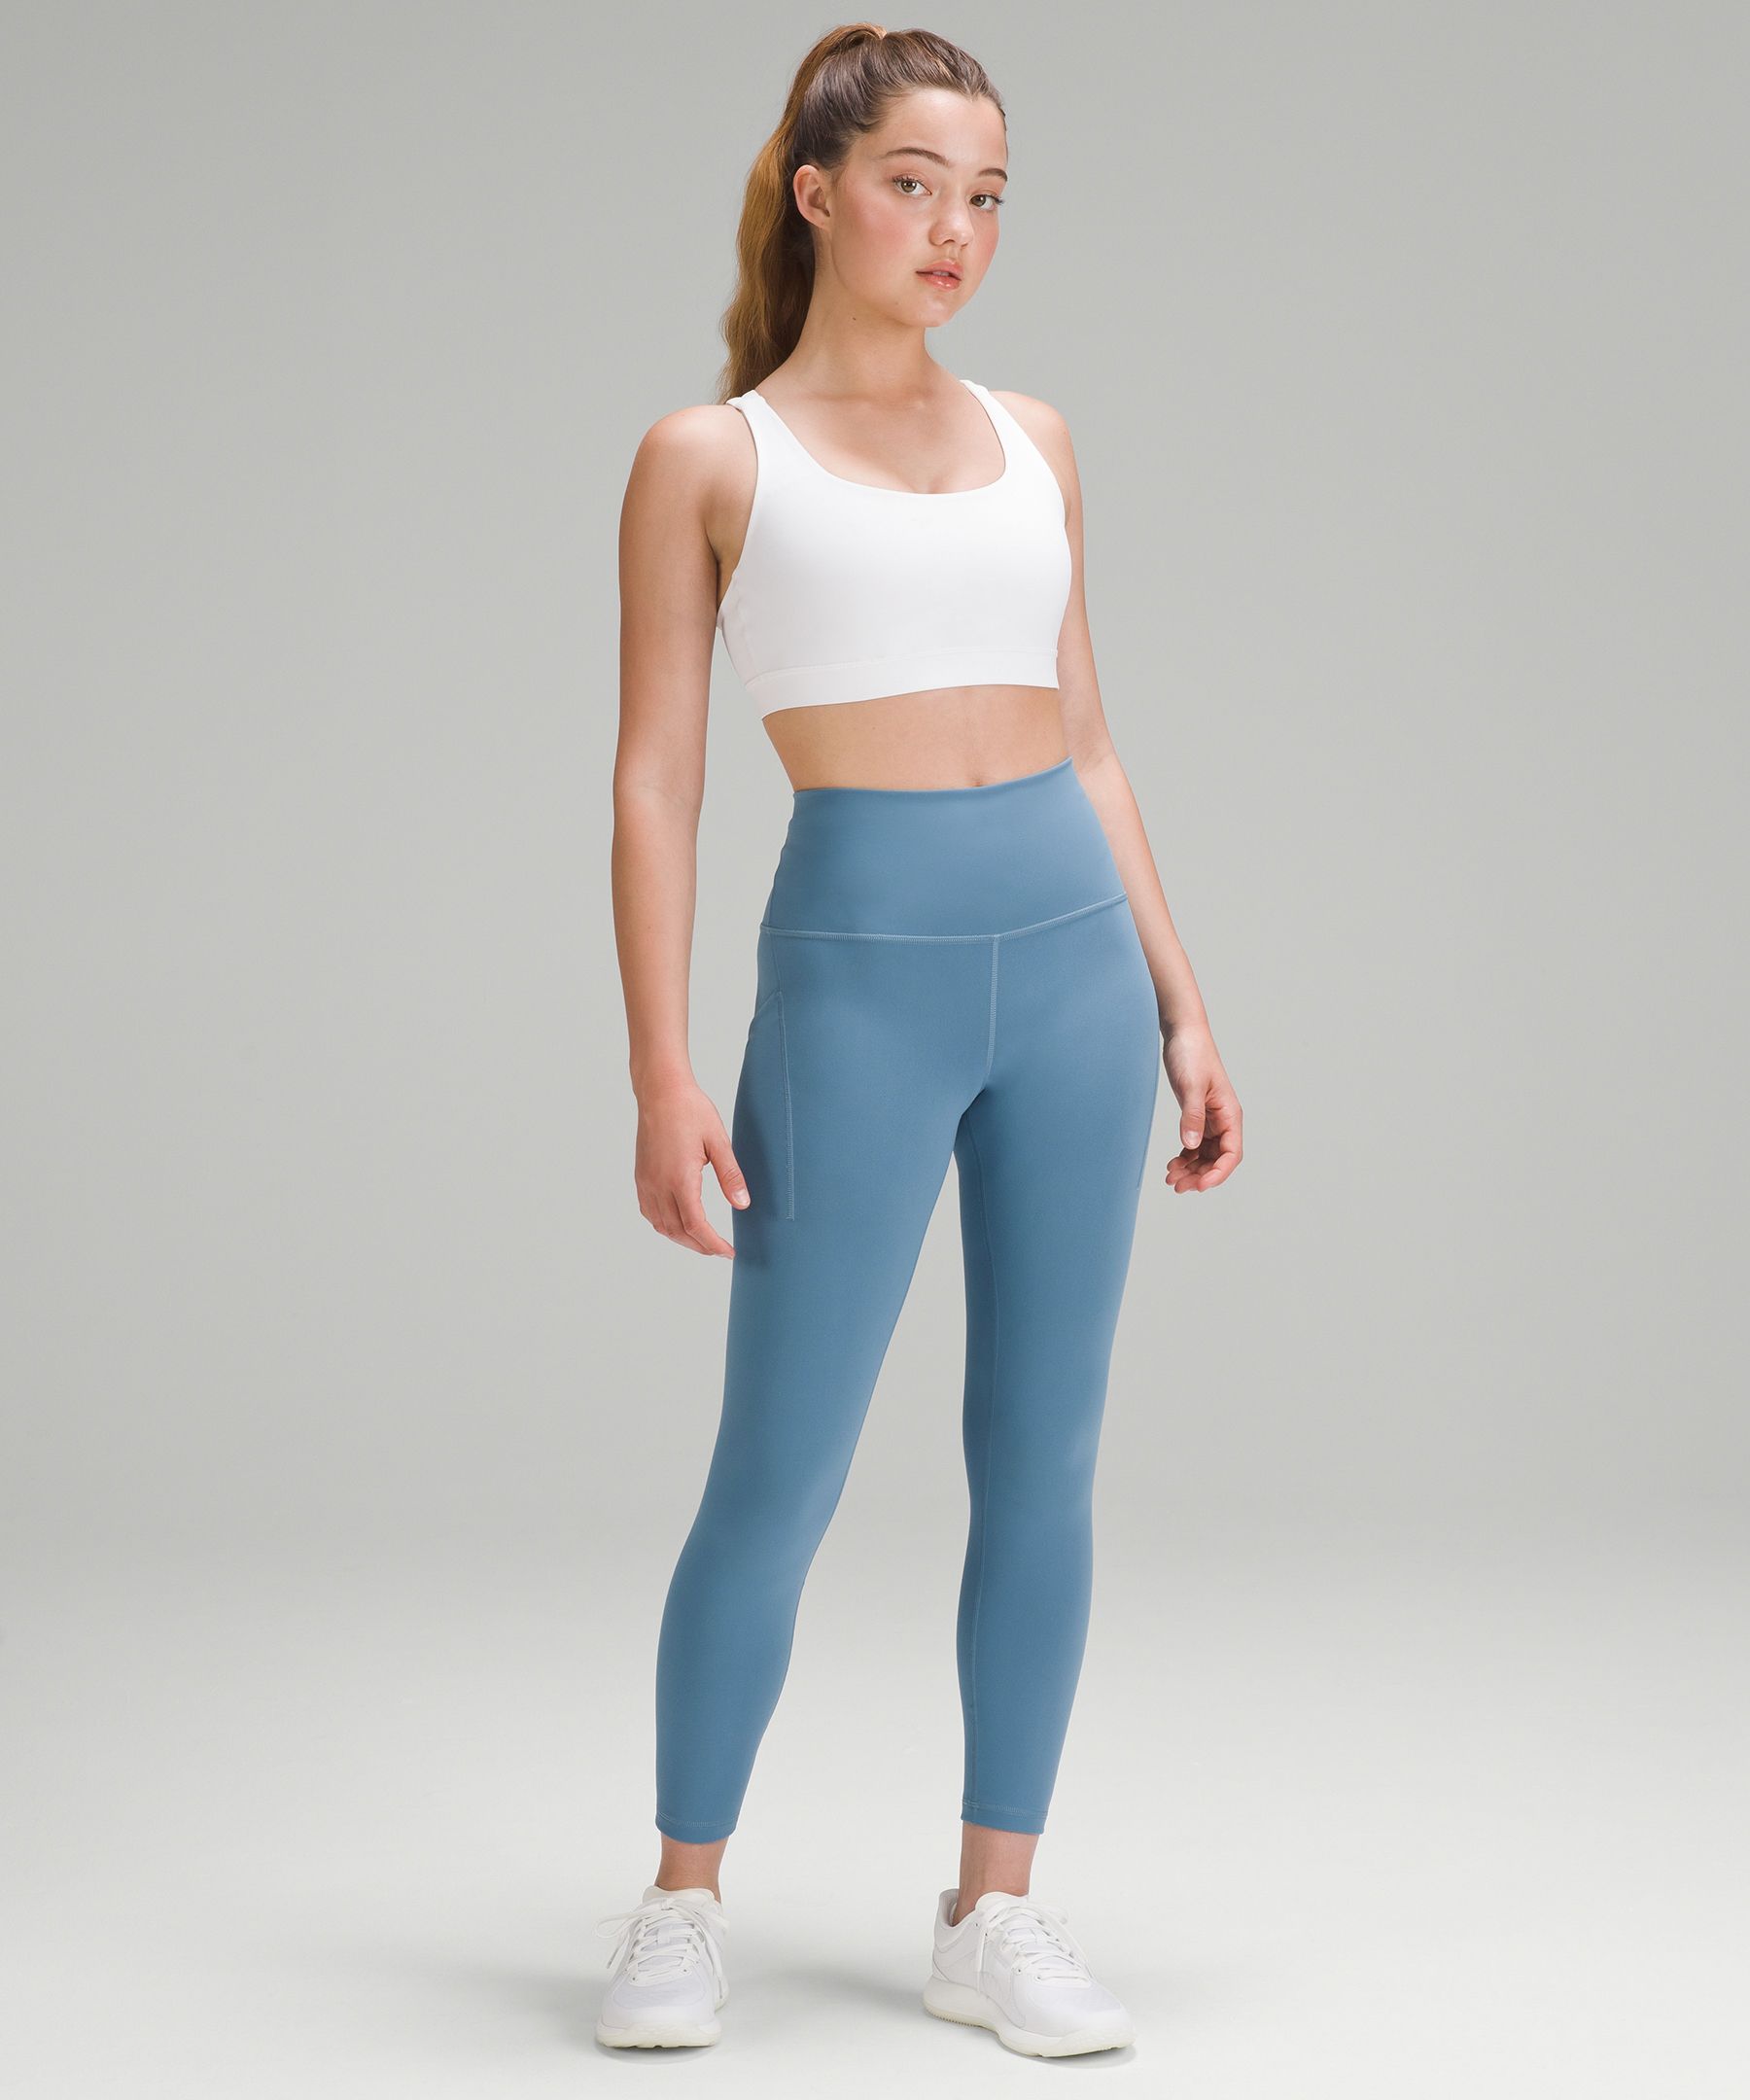 Lululemon Wunder Train High-Rise Tight with Pockets 25". 2